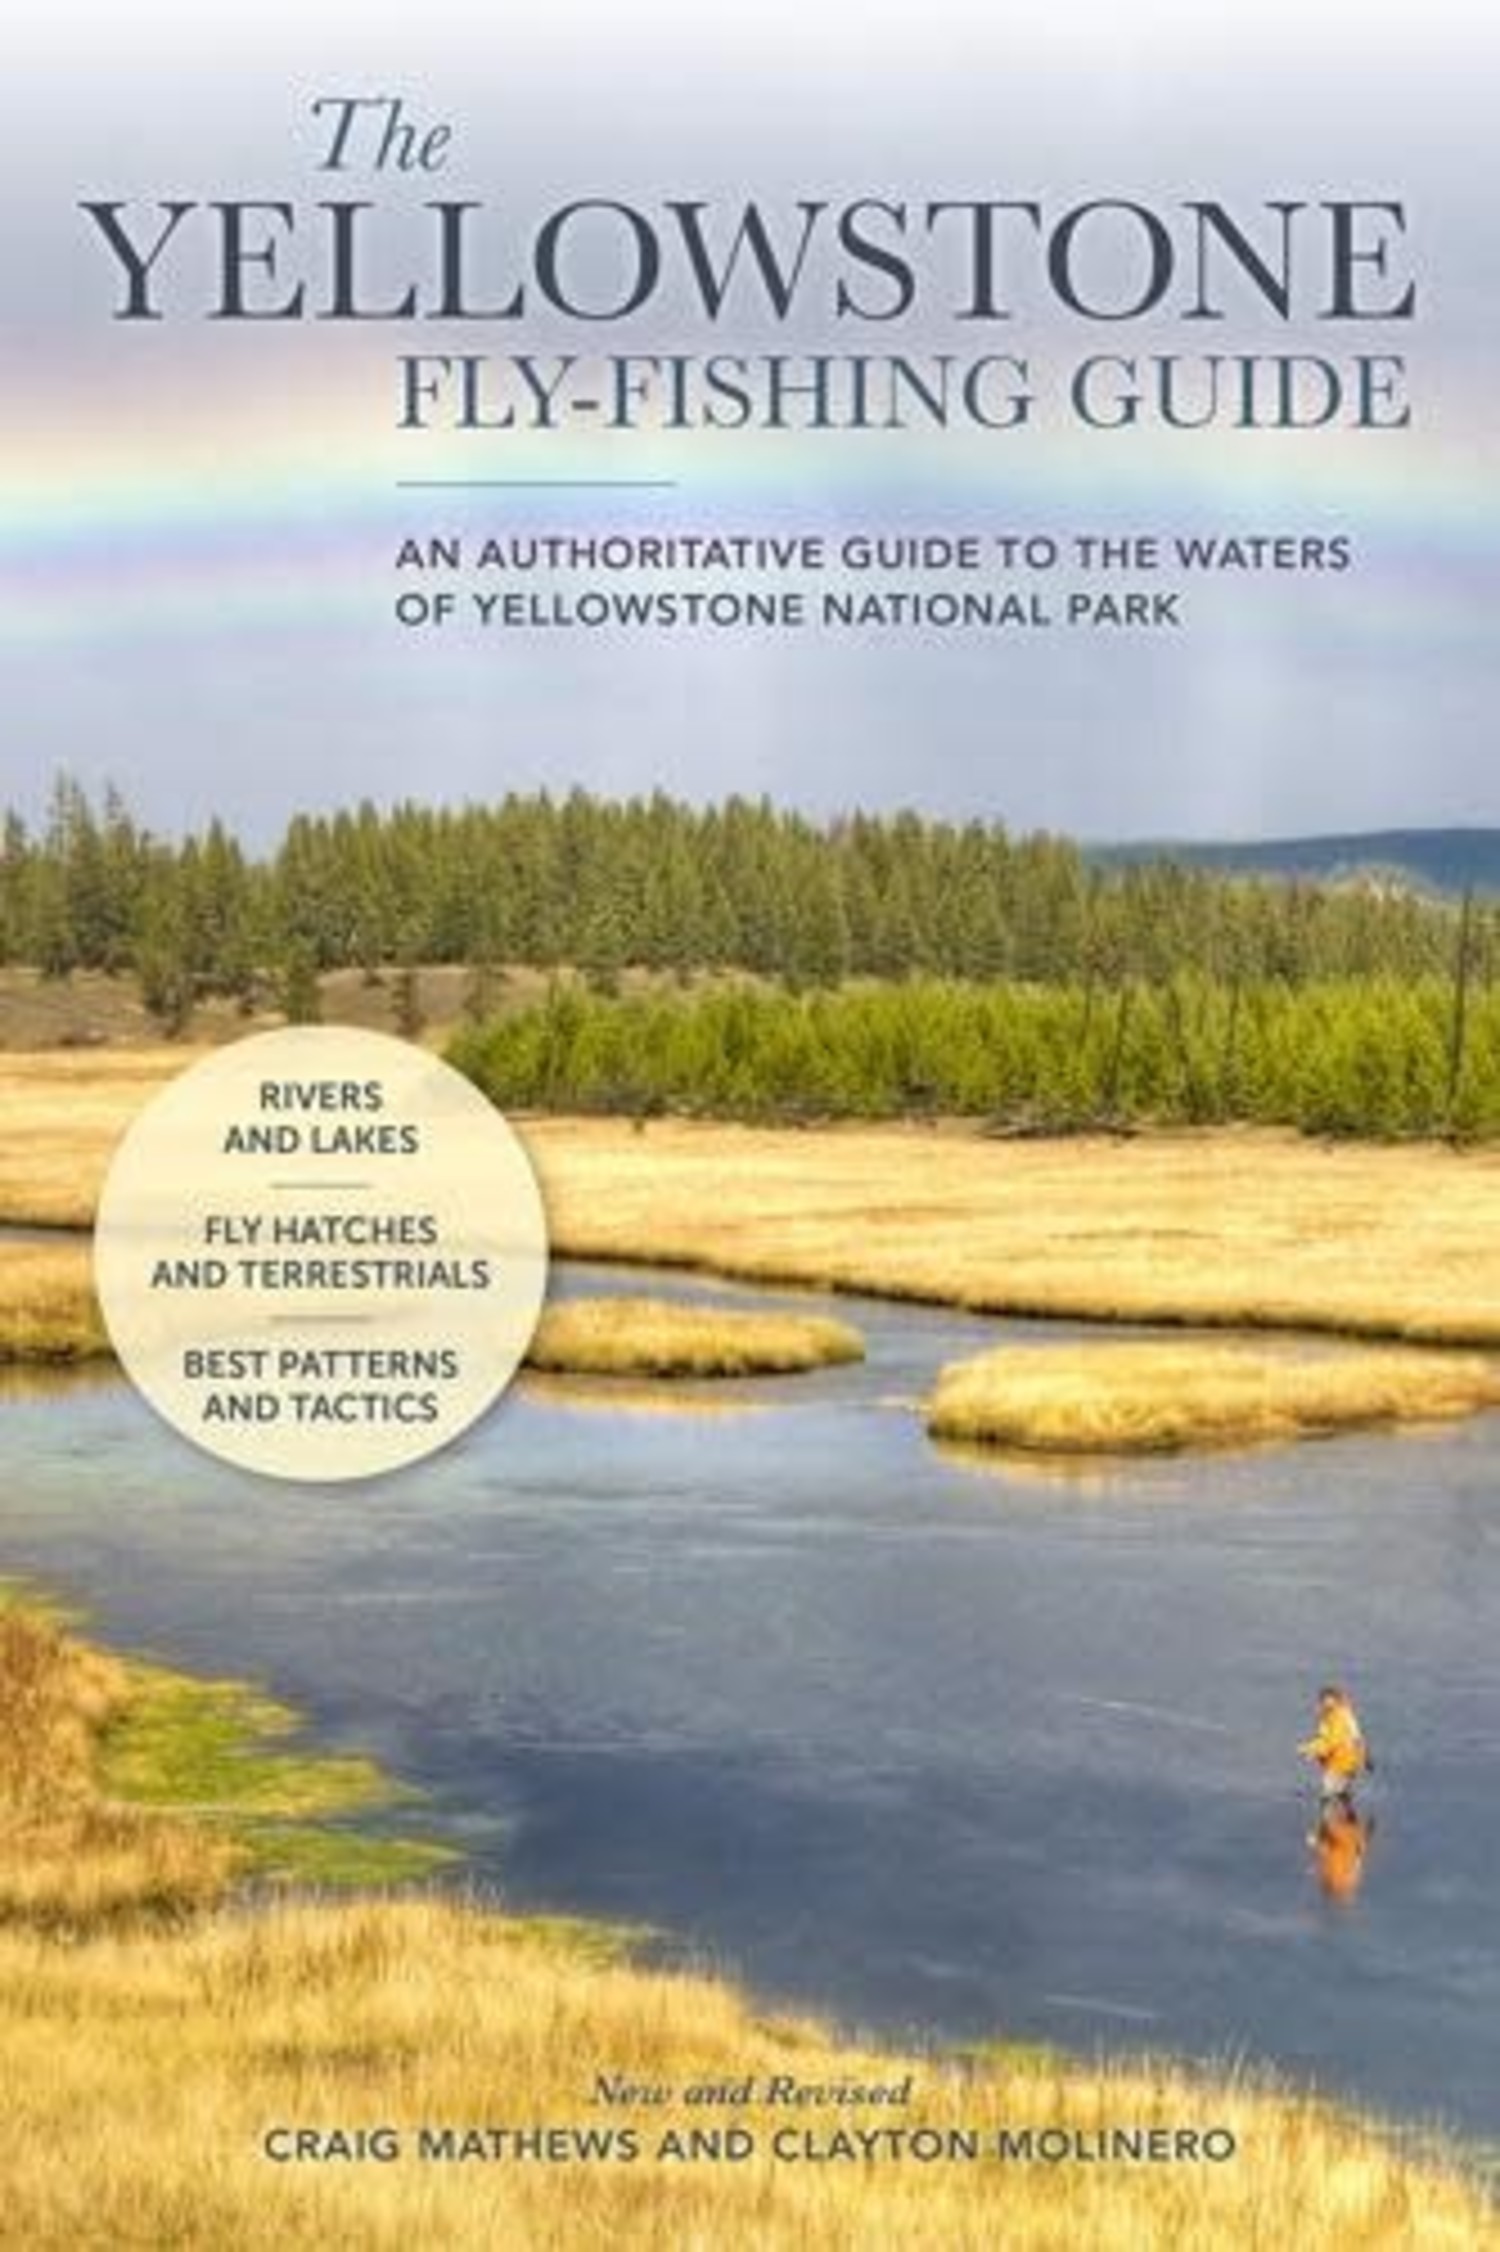 THE YELLOWSTONE FLY-FISHING GUIDE NEW AND REVISED - Royal Treatment Fly  Fishing